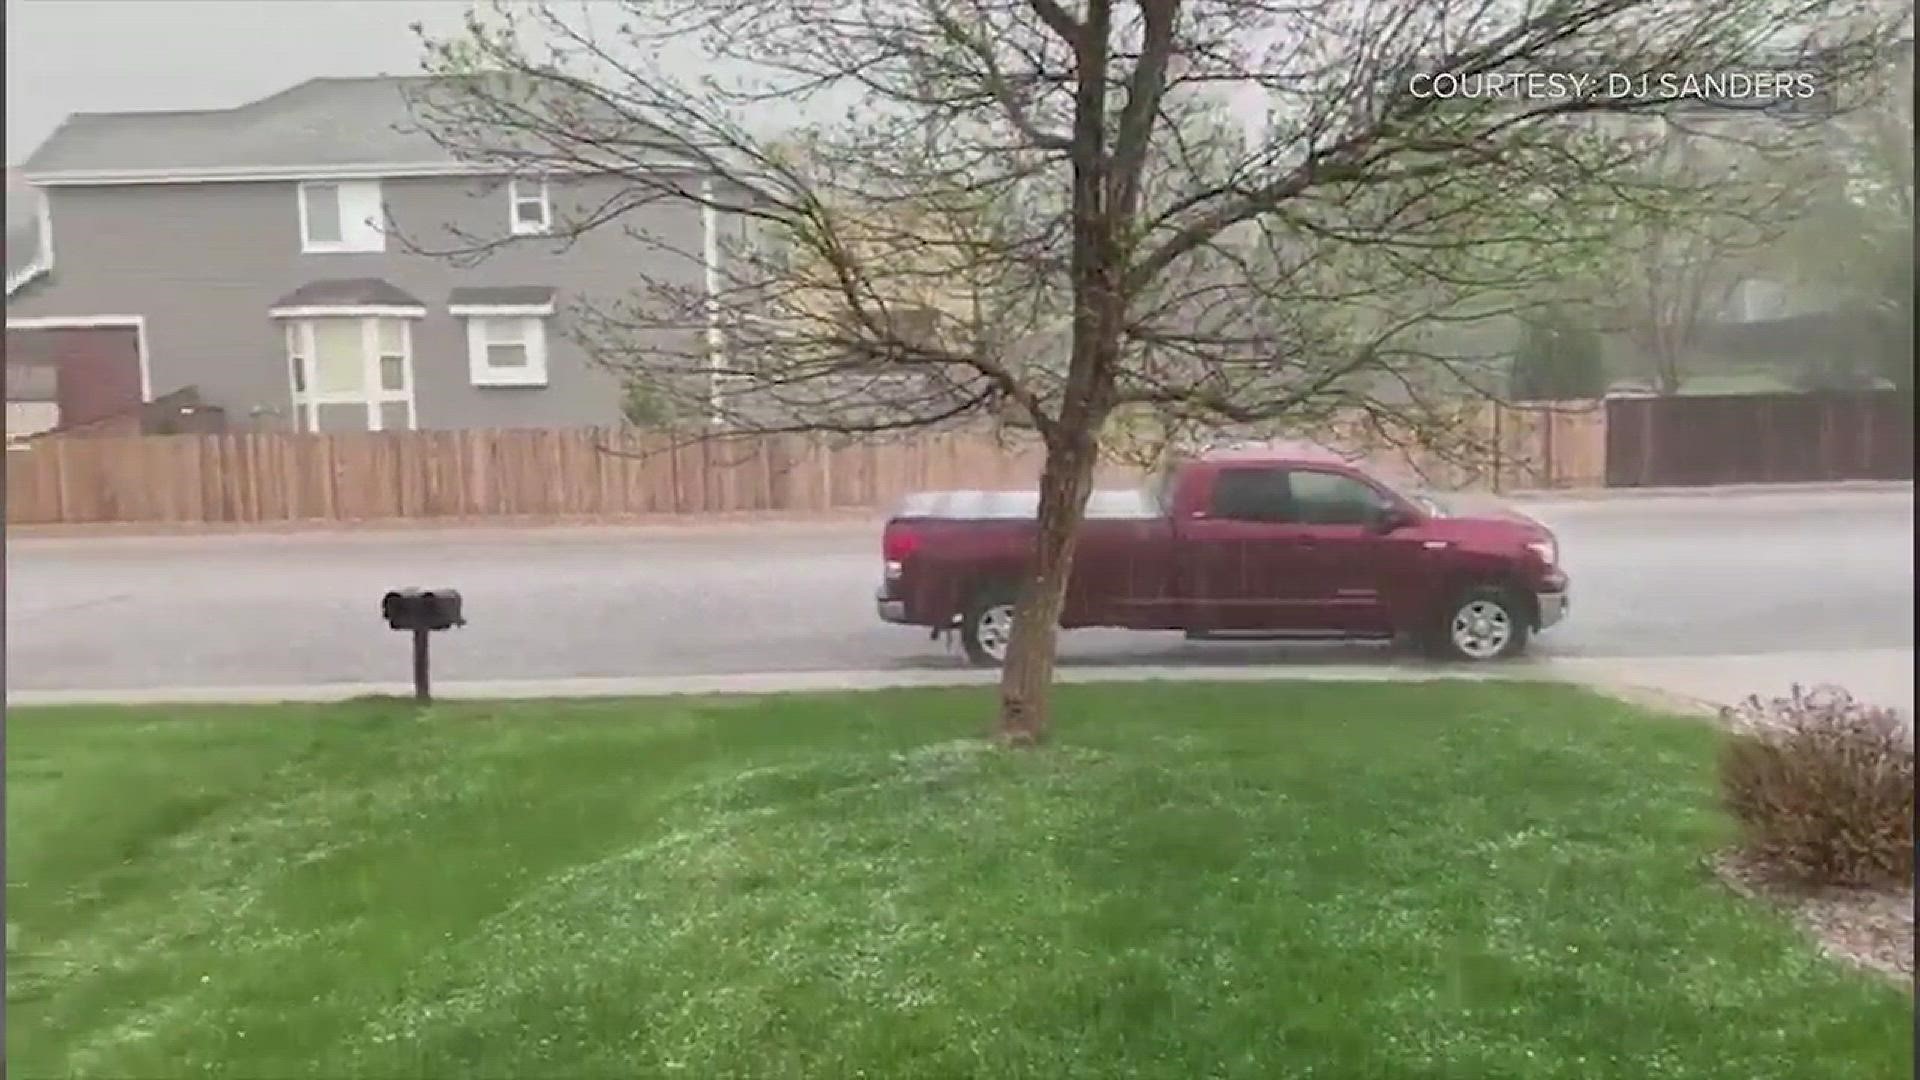 Photos and video showed pea-sized hail blanketing the ground in Broomfield, Westminster, Brighton and Thornton.